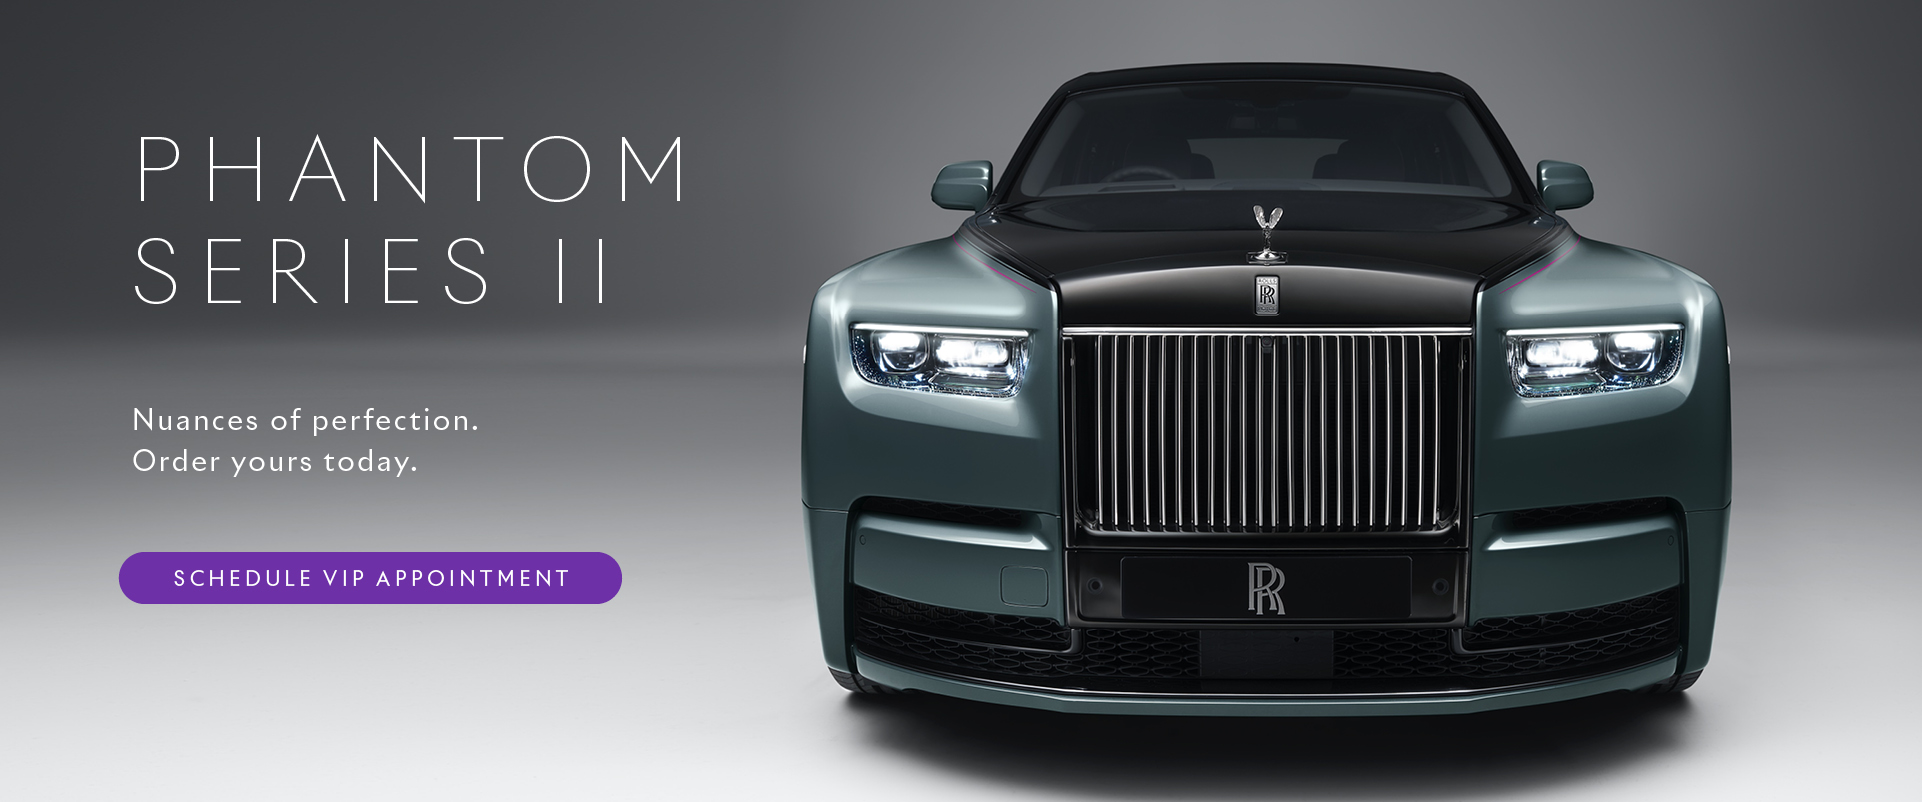 RollsRoyce Welcome to the home of the most luxurious cars in the world